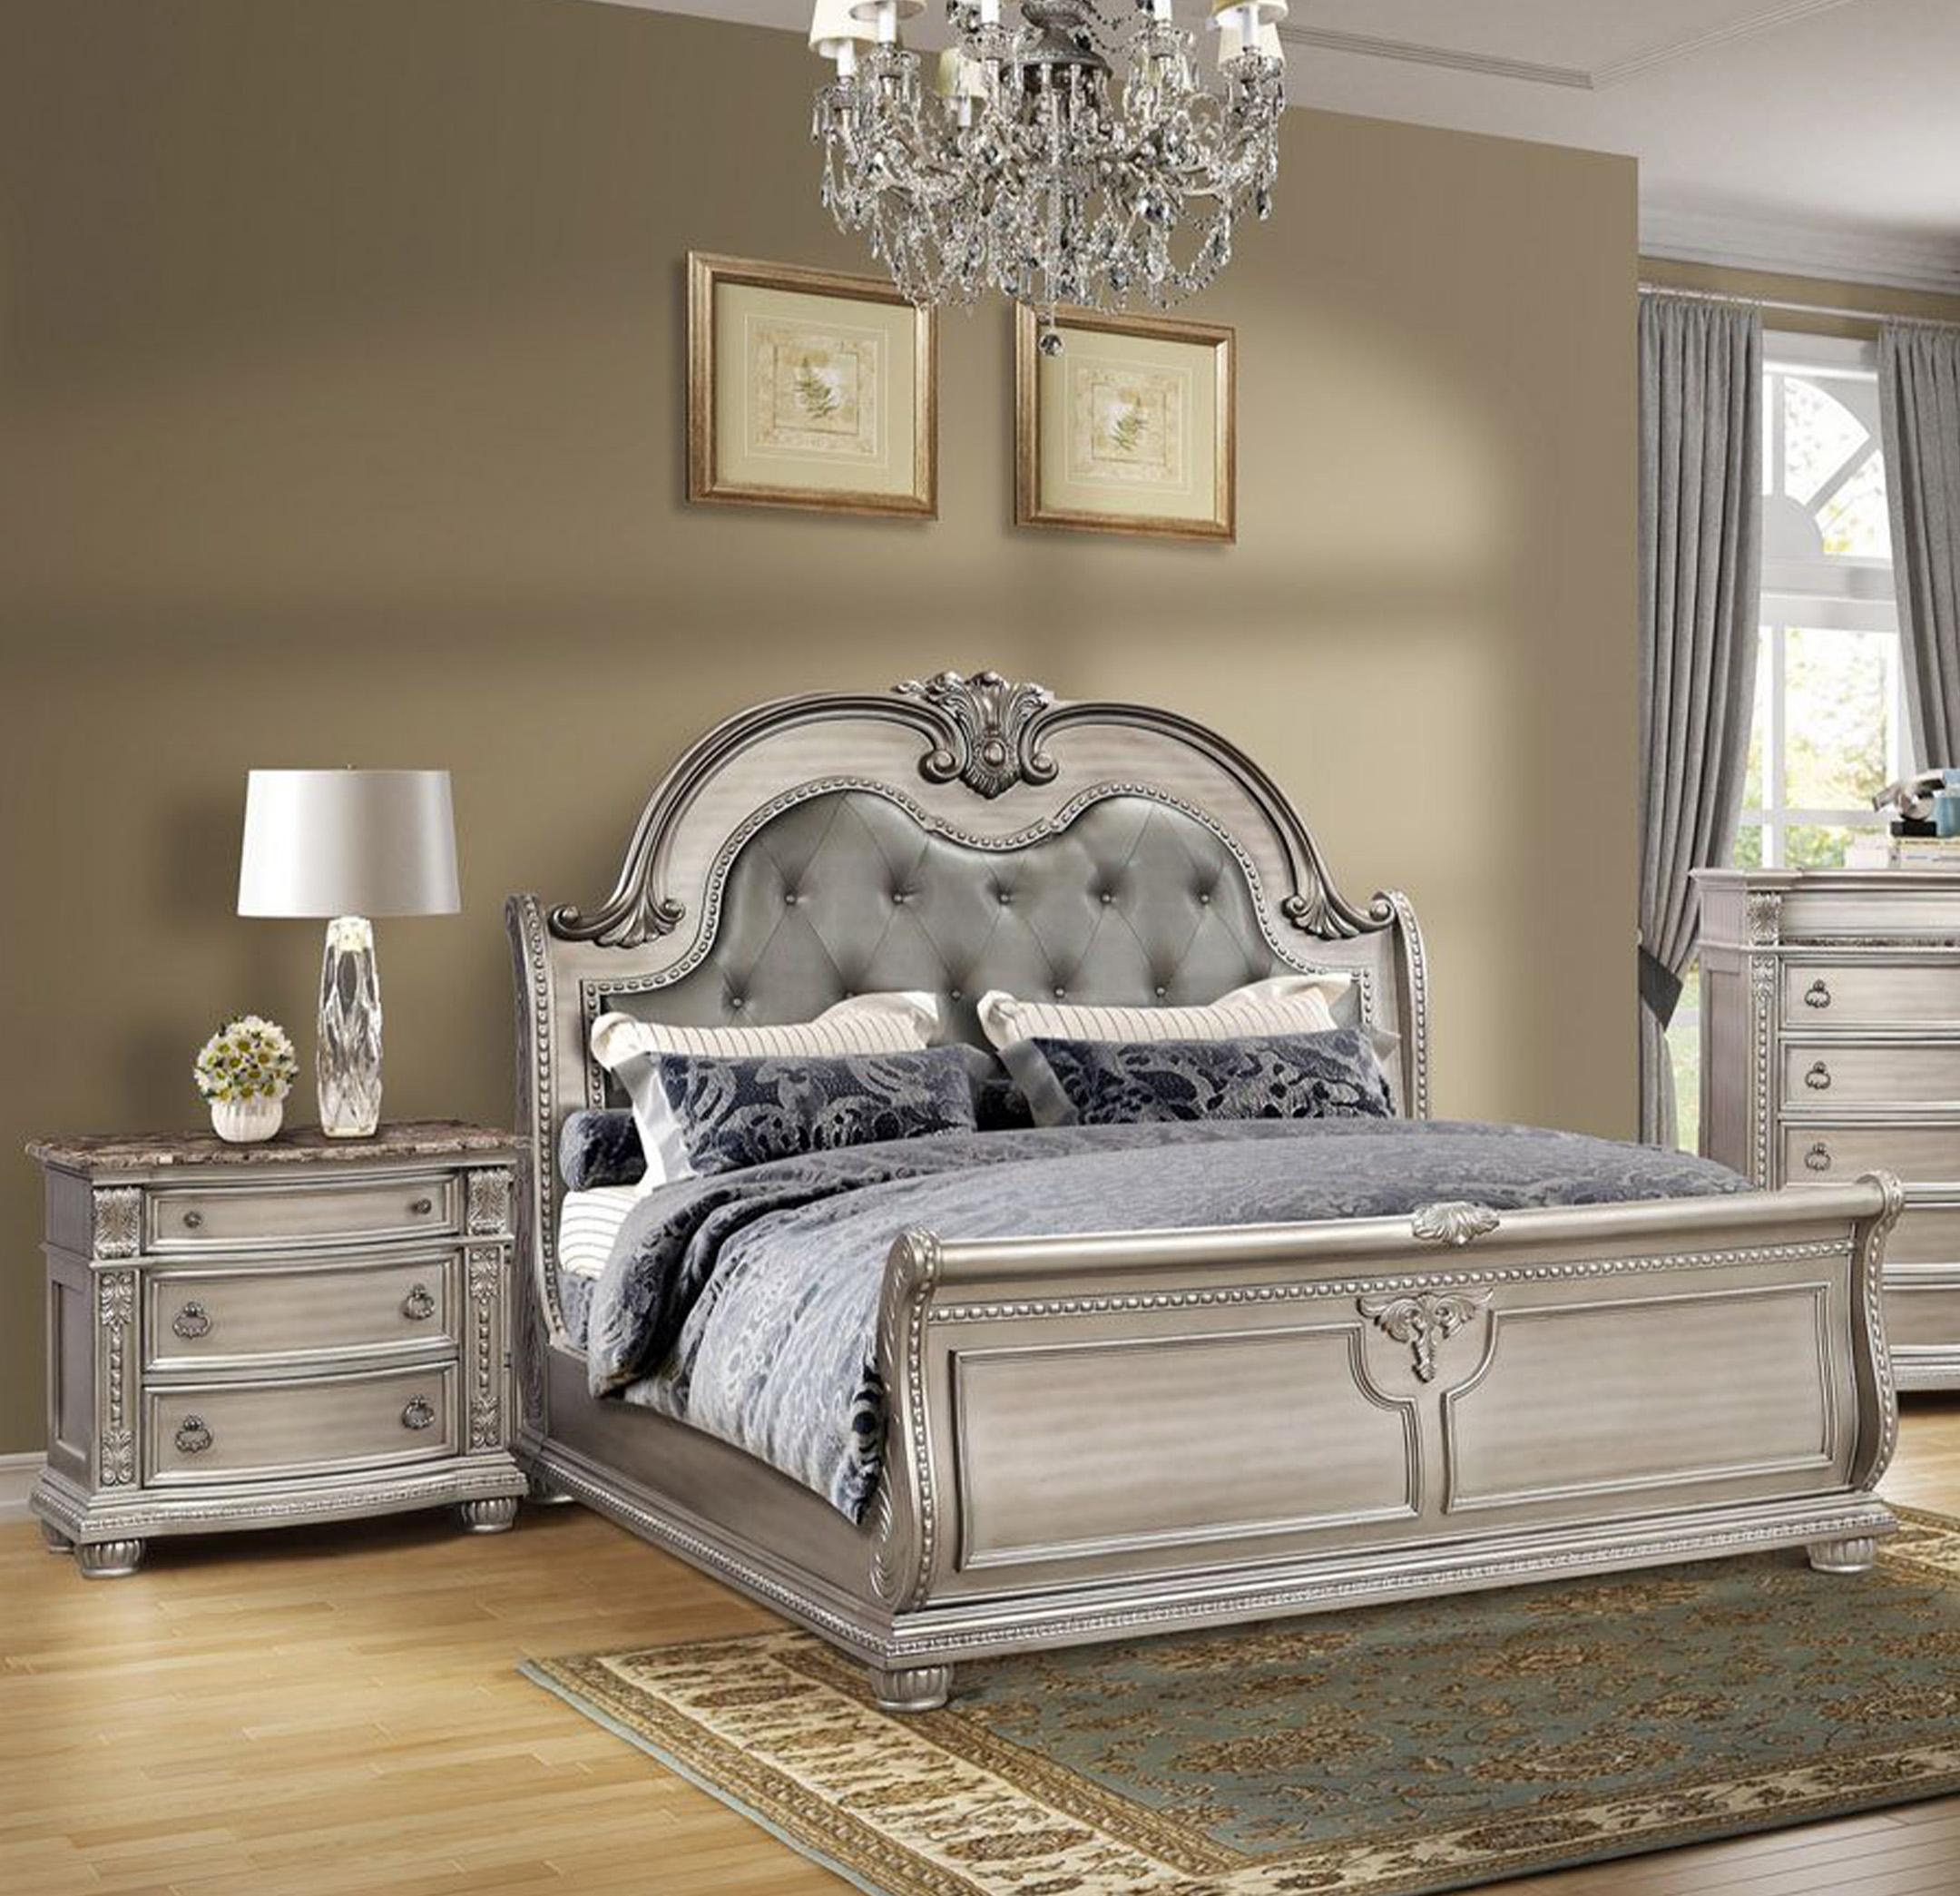 Classic, Traditional Sleigh Bedroom Set B9506 B9506-CK-N-2PC in Platinum Bonded Leather